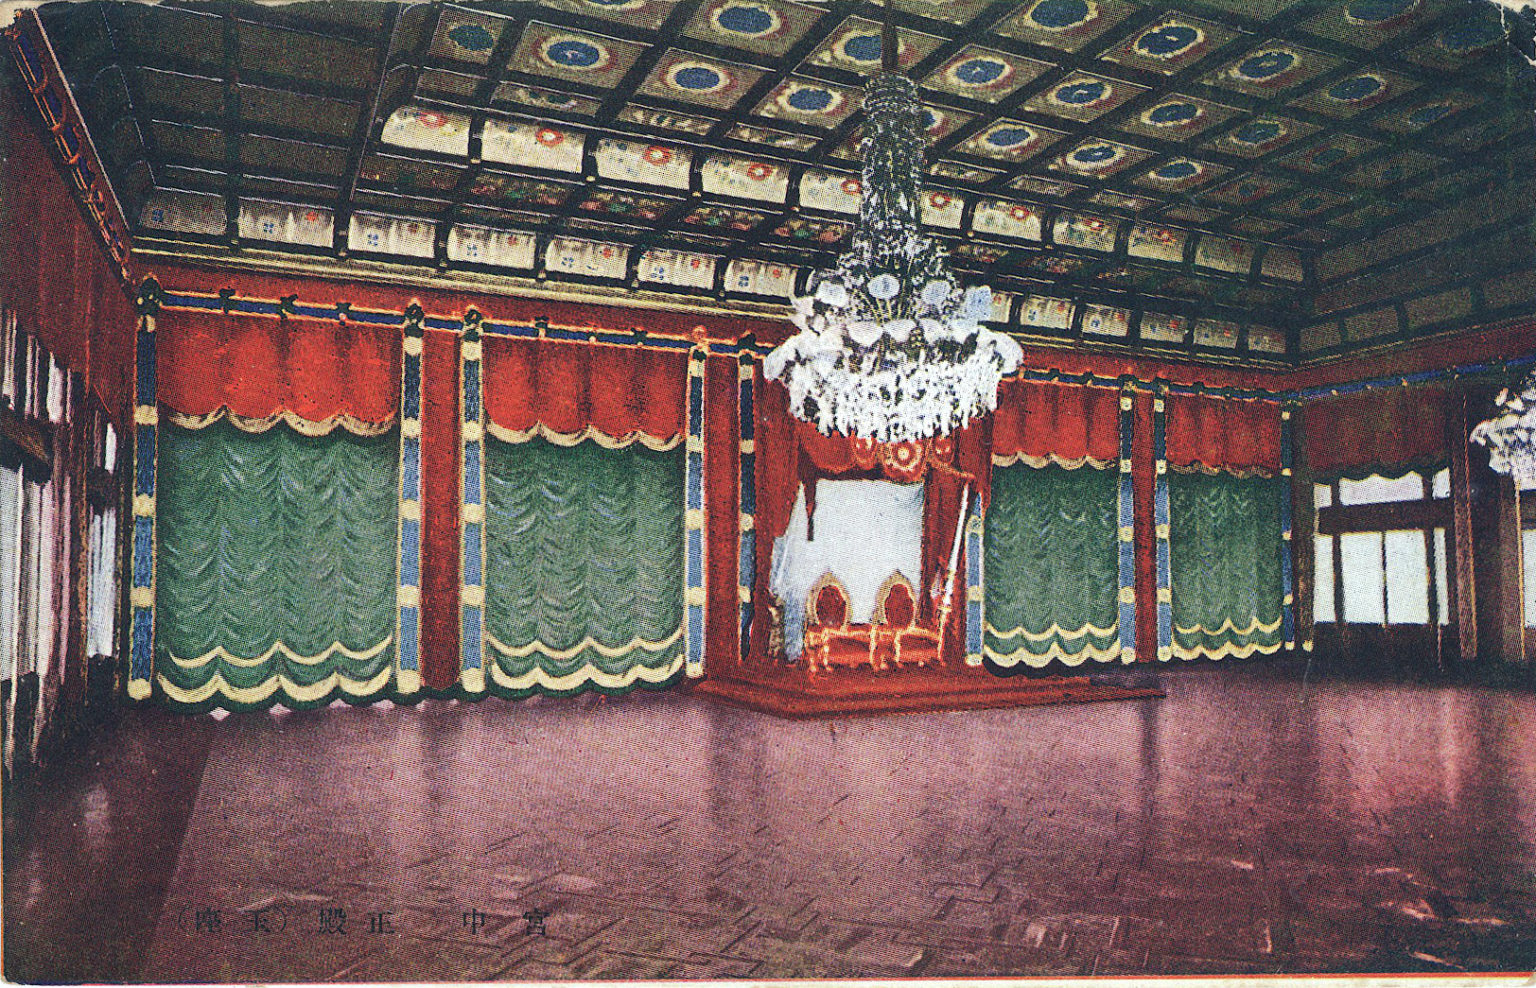 Imperial Palace (Meiji Palace) interiors, Tokyo, c. 1920. | Old